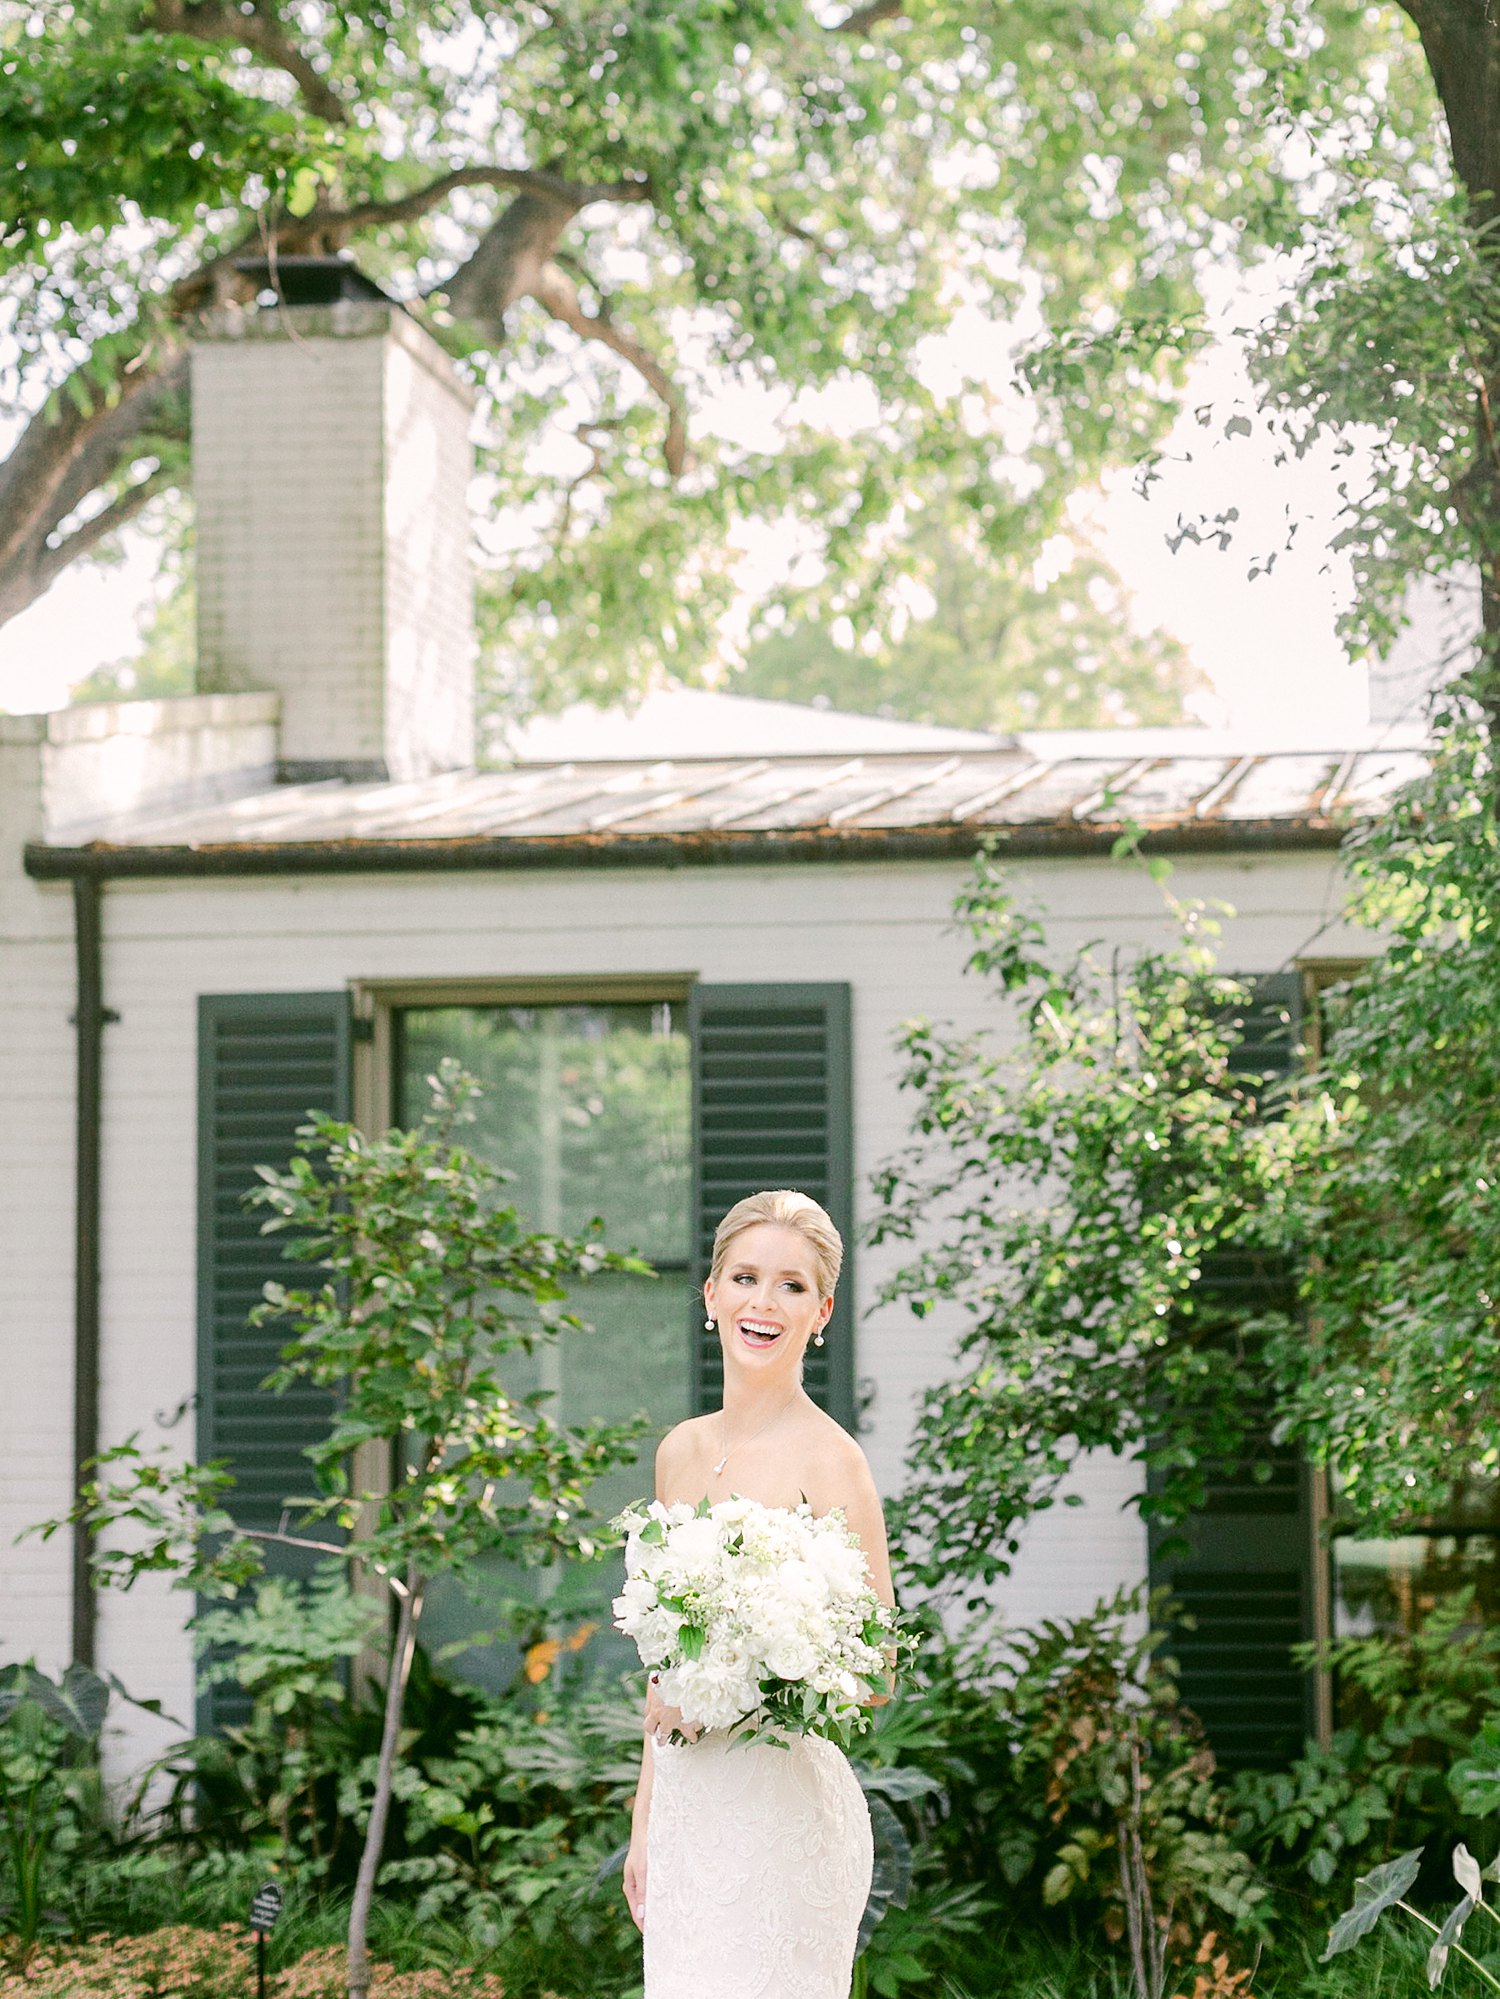 Bride holding white bouquet laughing in front of building with greenery at Dallas Arboretum Wedding